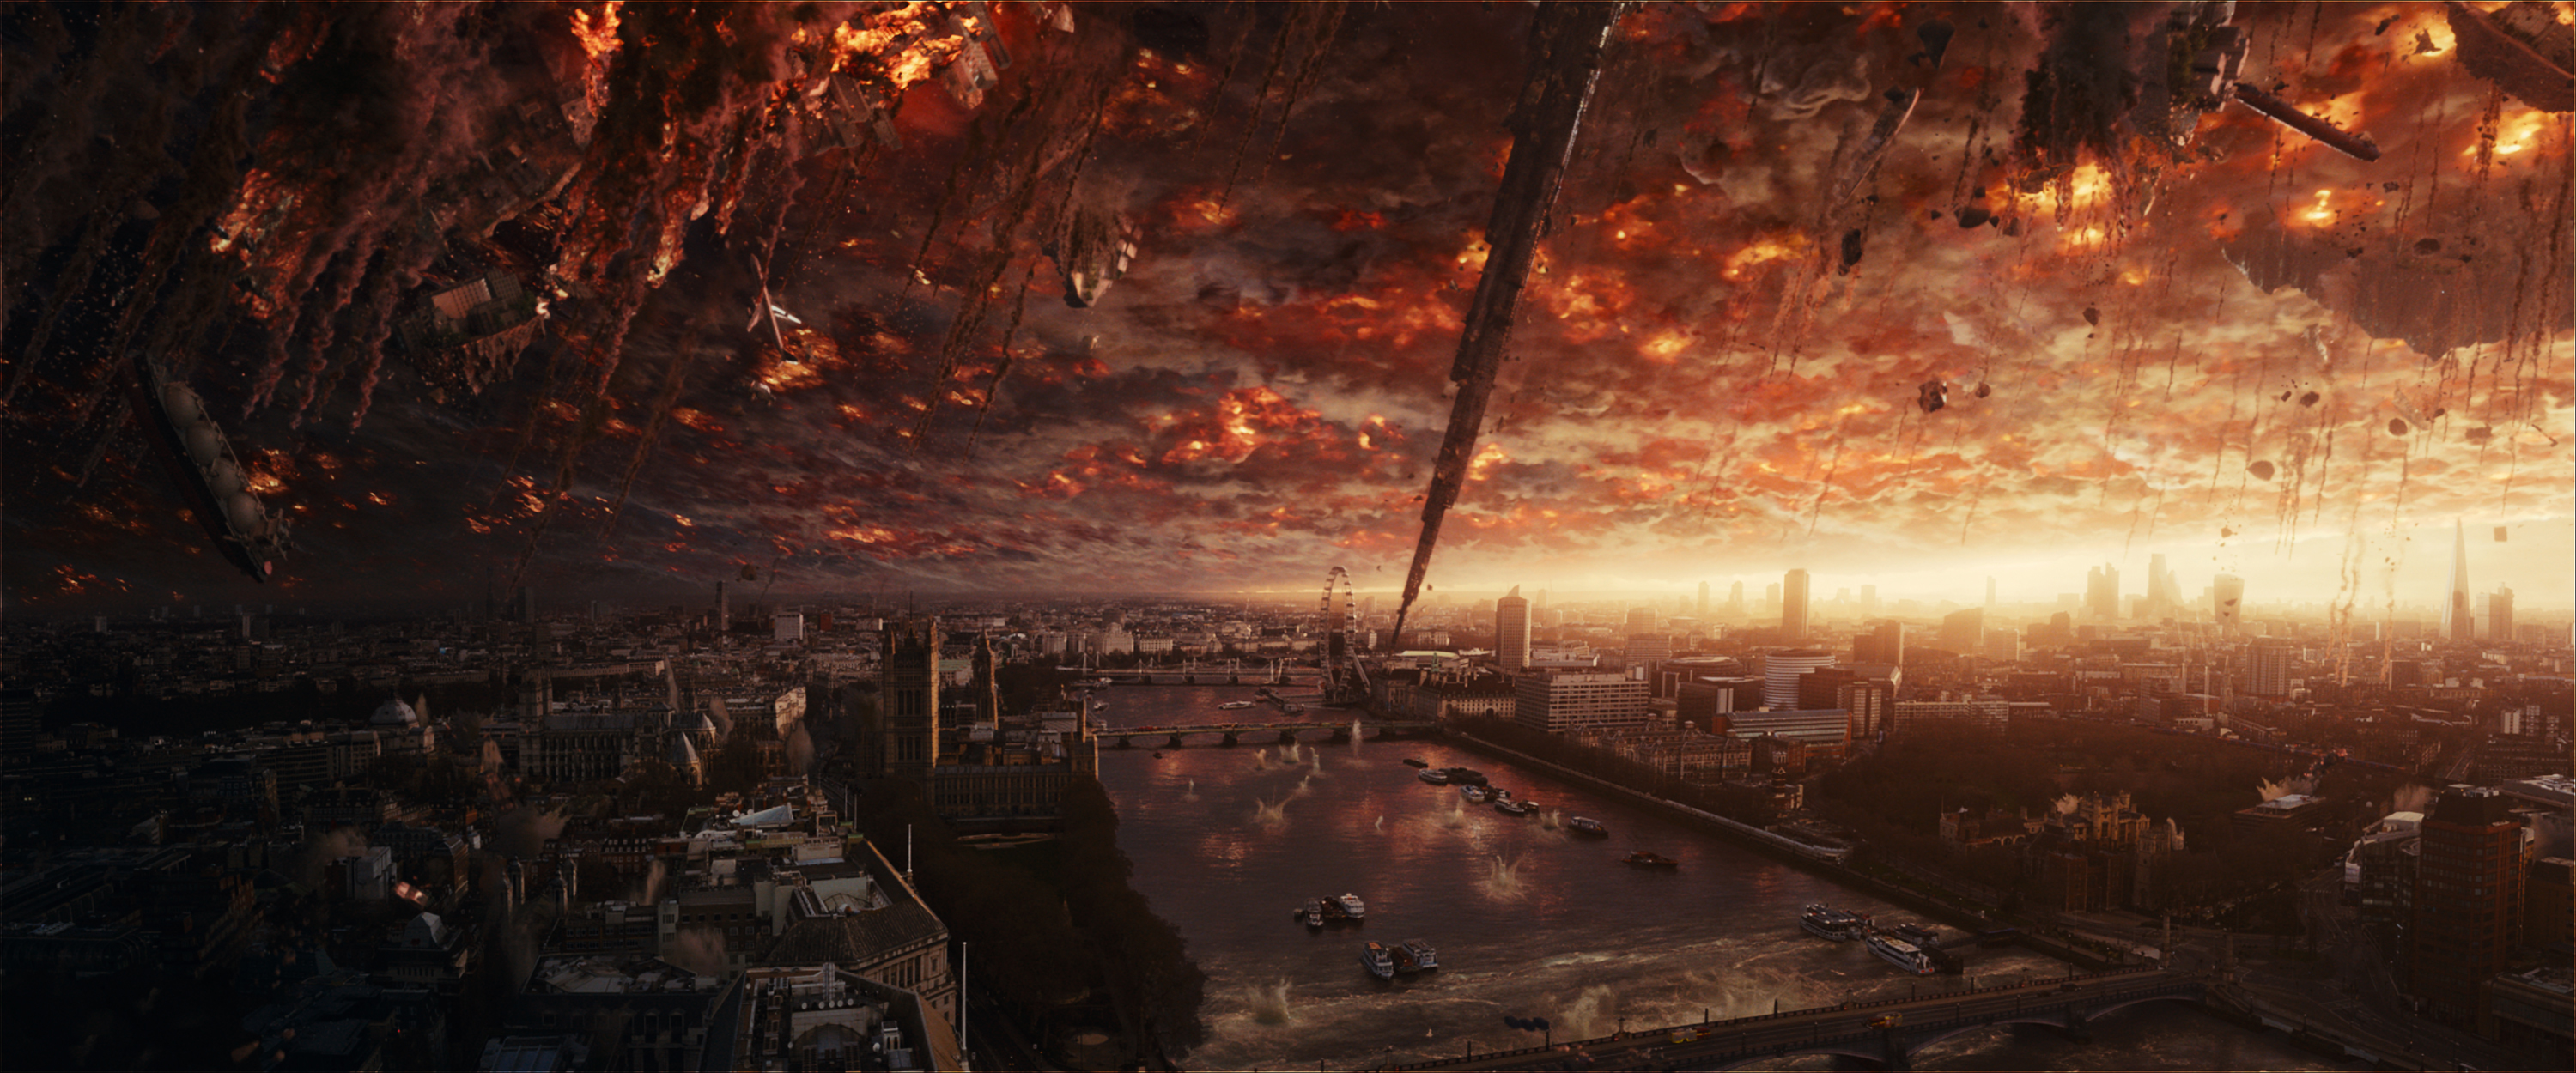 Earth's New Battle Against Aliens: Photo from 'Independence Day: Resurgence'